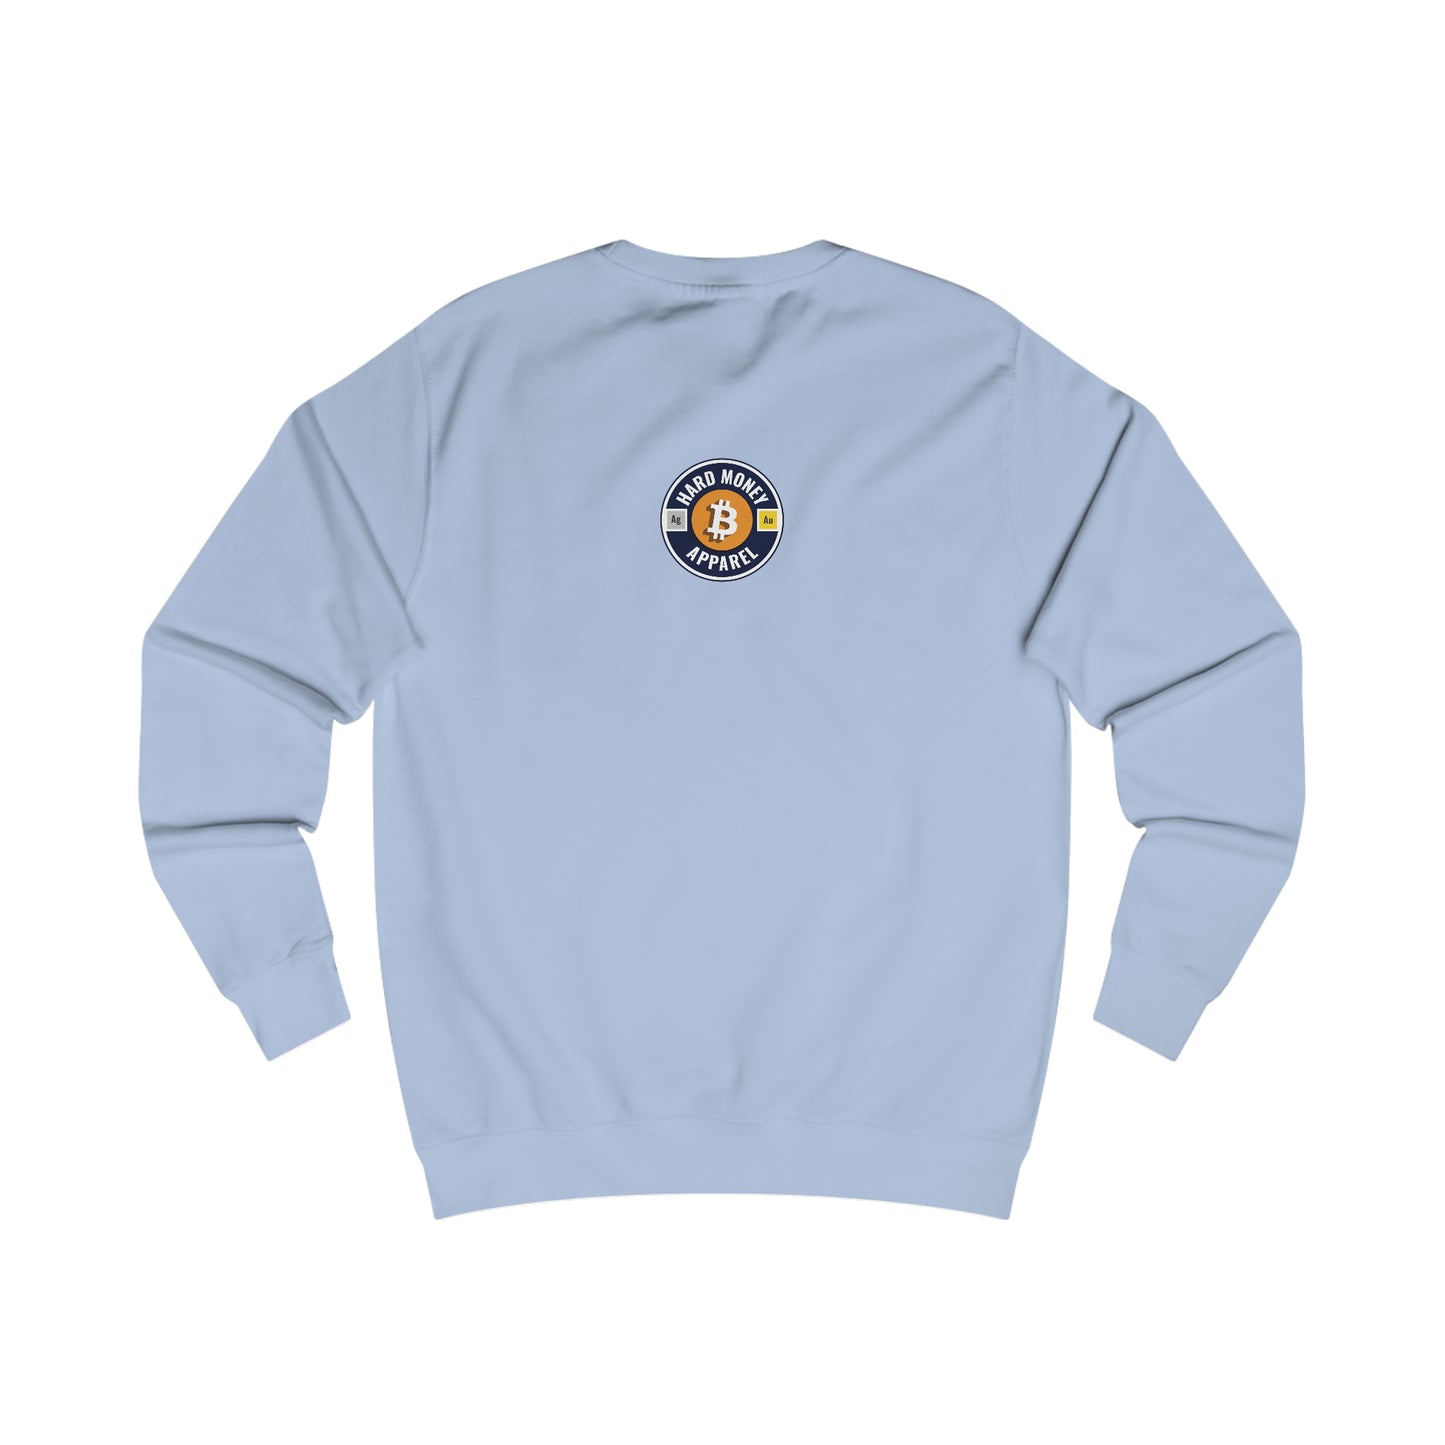 Bitcoin is Forever Fitted Crewneck Sweatshirt